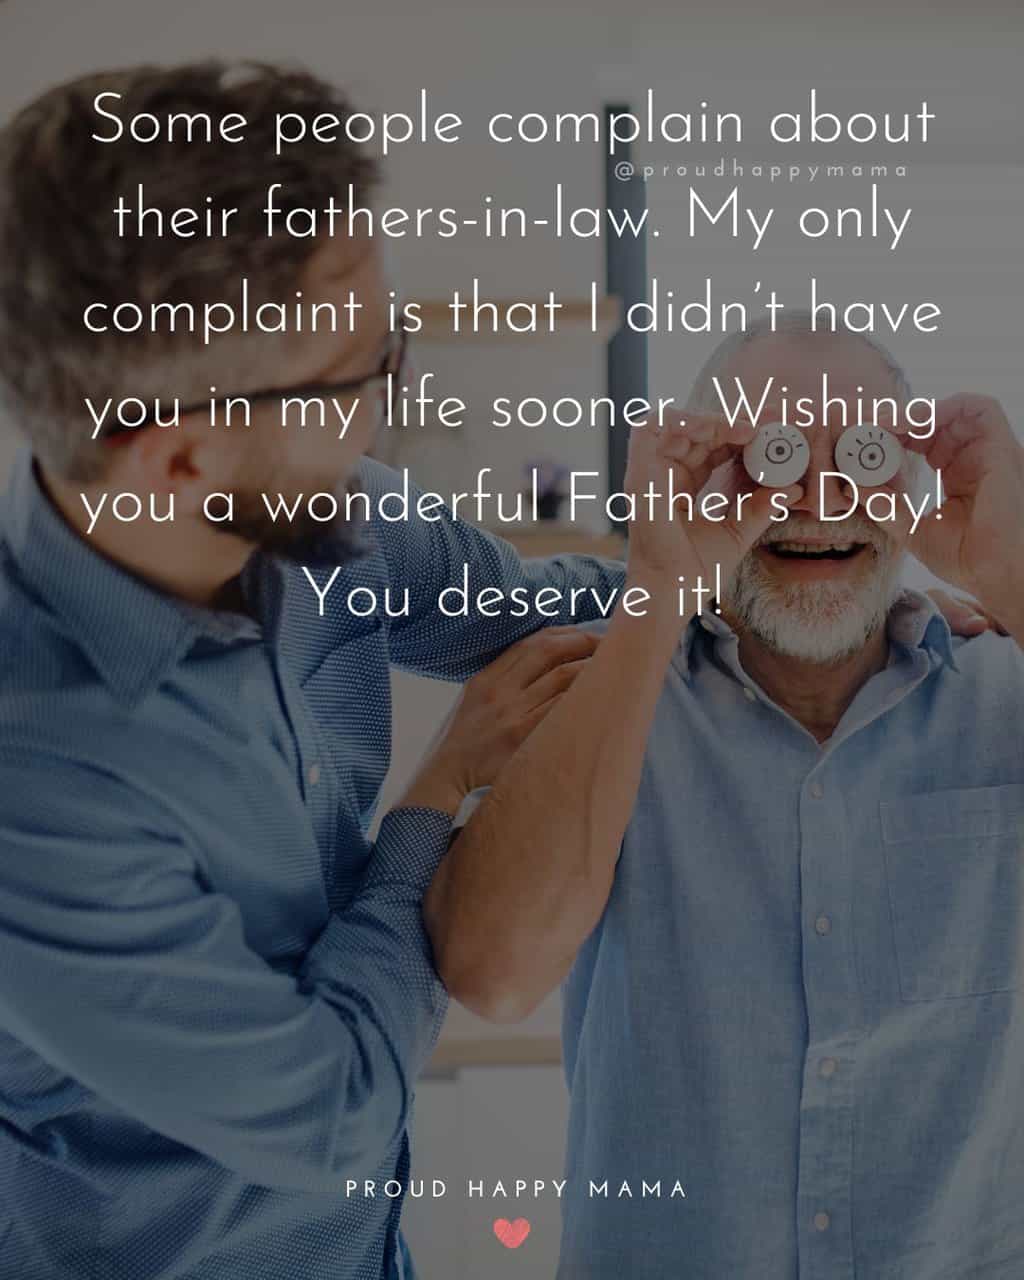 Father in law and son in law laughing with father in law quote for fathers day text overlay. 'Some people complain about their fathers-in-law. My only complaint is that I didn’t have you in my life sooner. Wishing you a wonderful Father’s Day! You deserve it!'